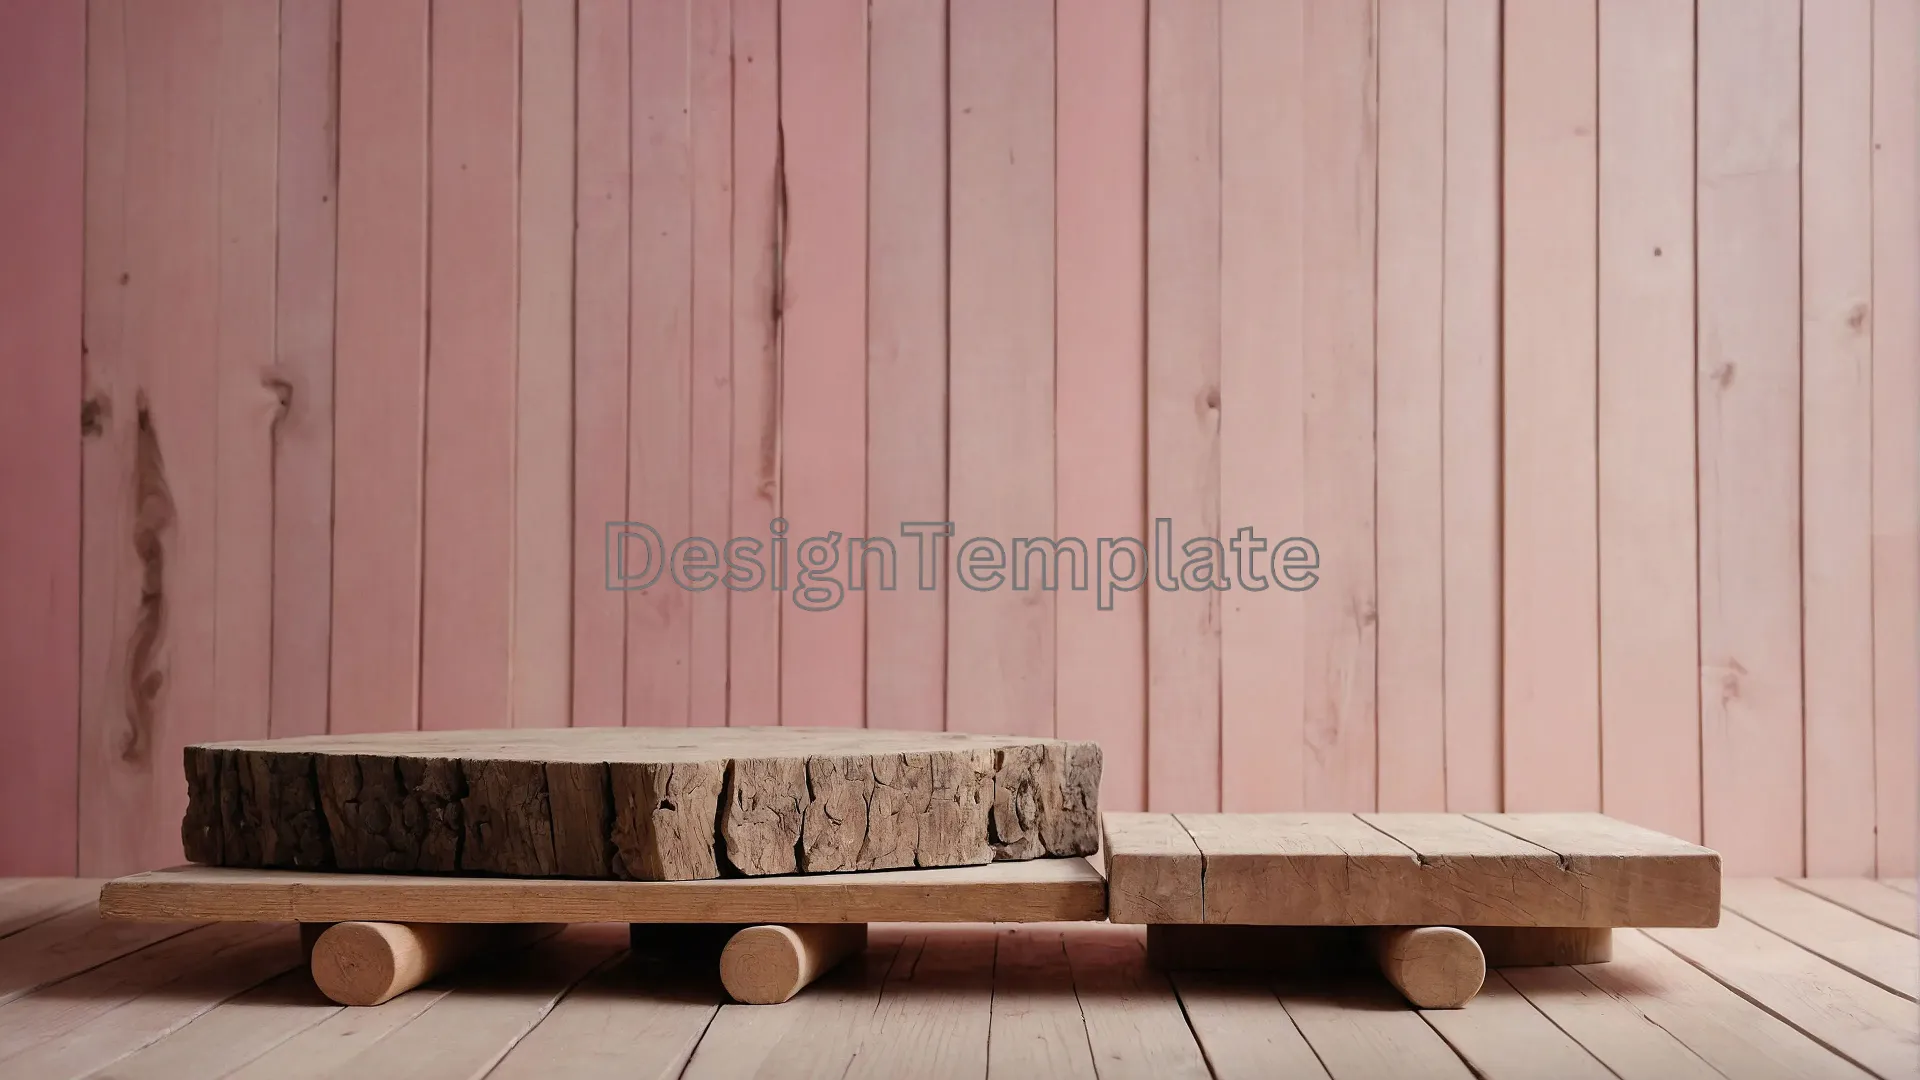 Rustic Wood Planks on Pink Pastel Wall Background Image image